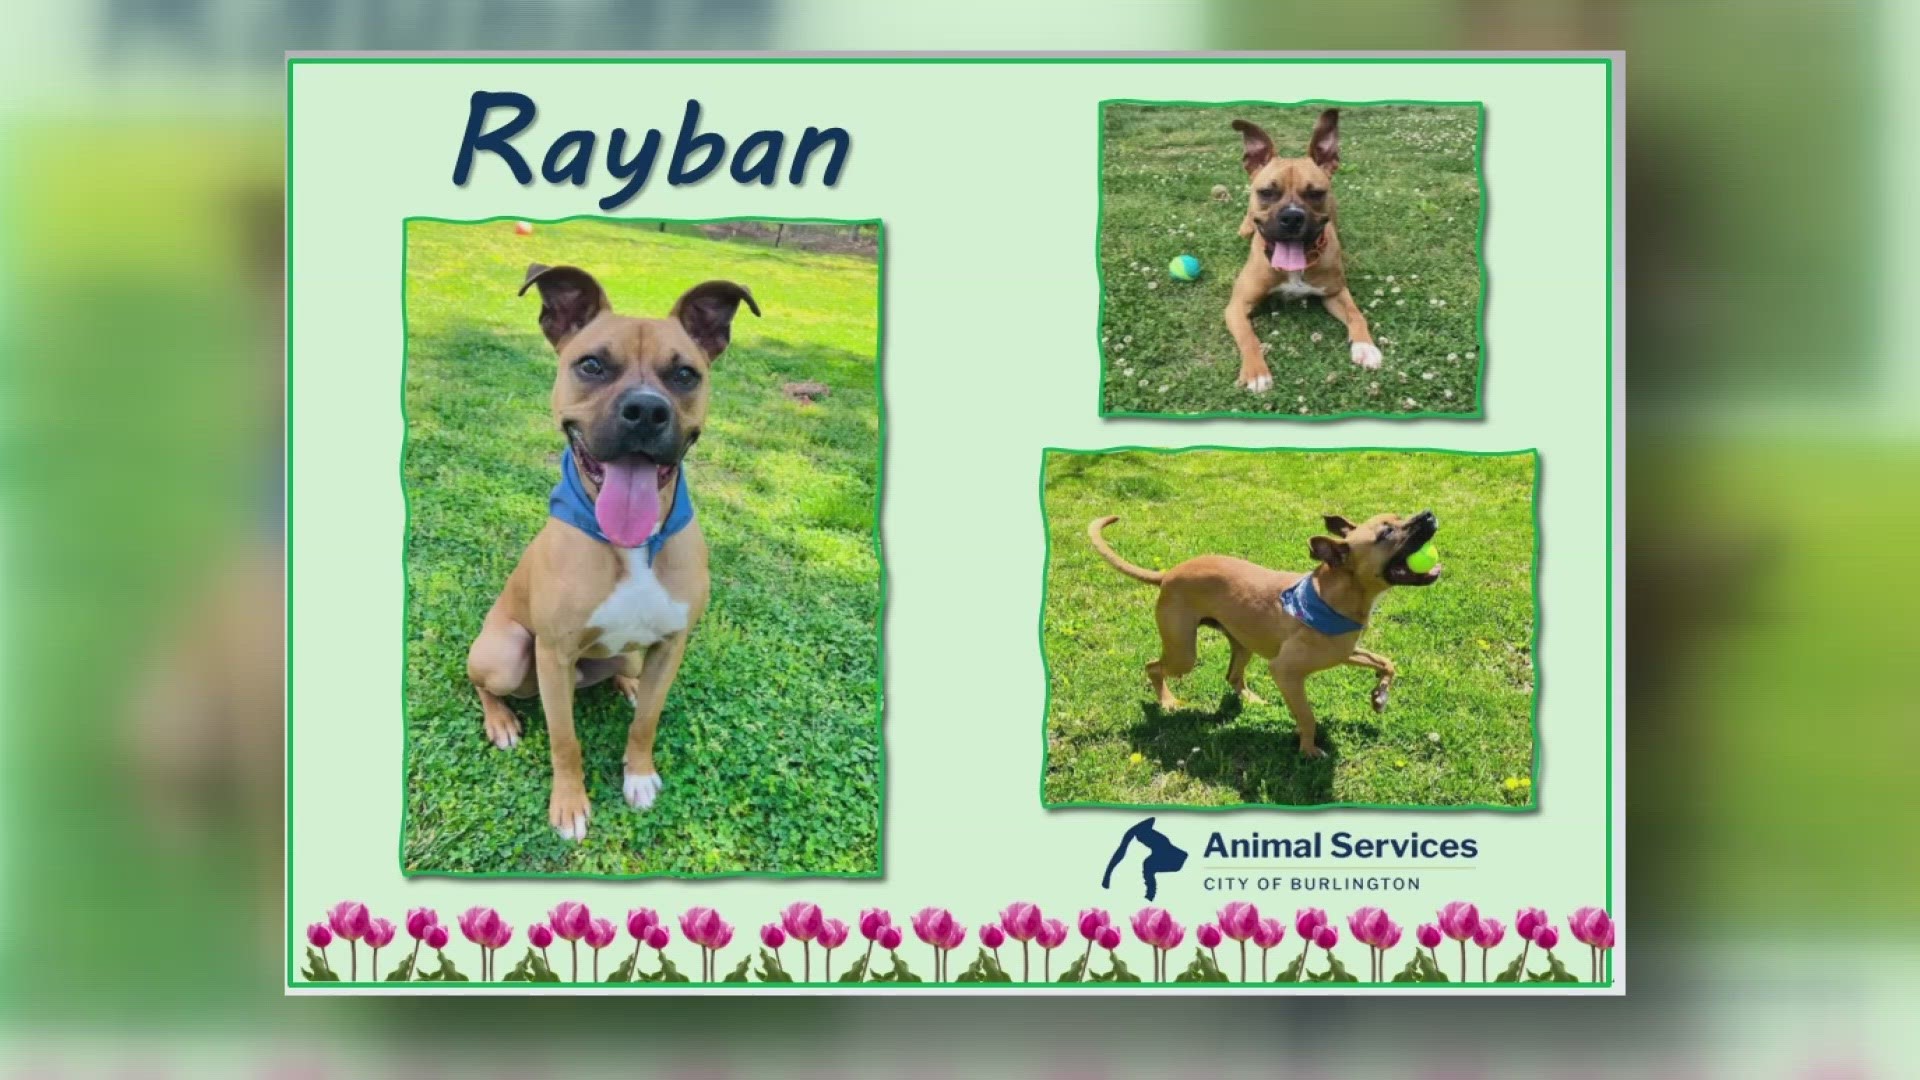 Let’s get Rayban adopted!